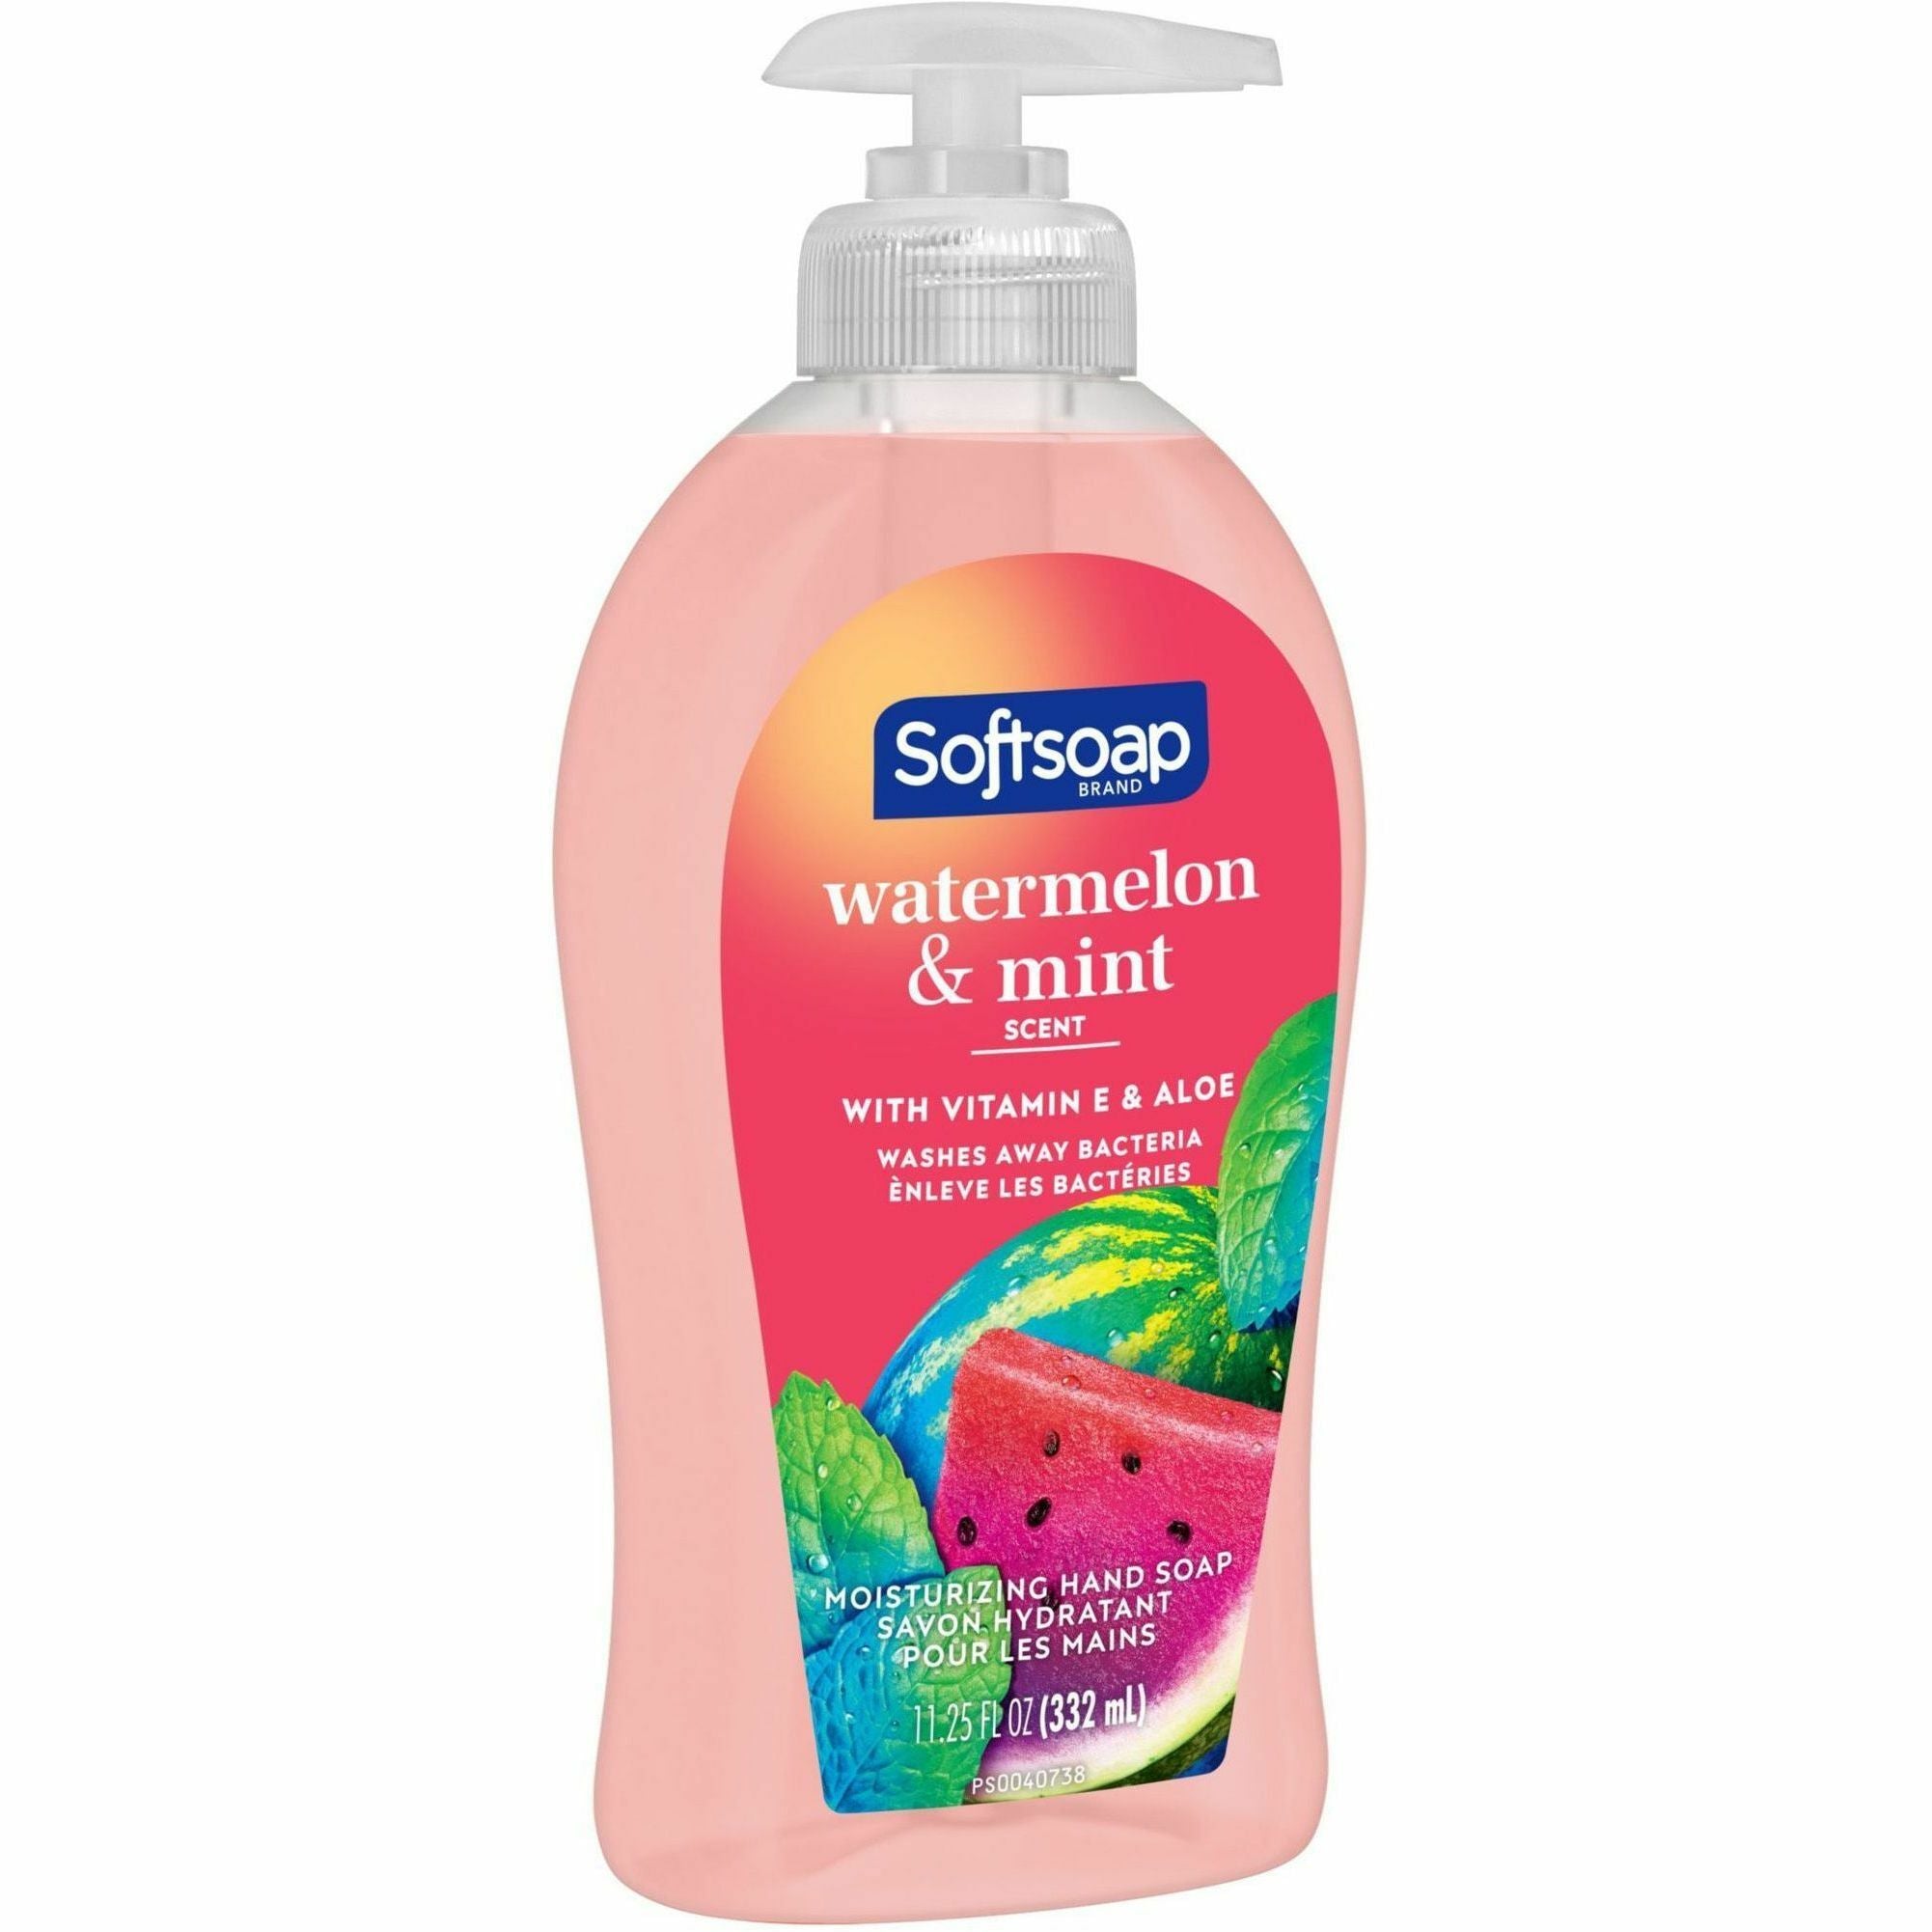 softsoap-watermelon-hand-soap-watermelon-&-mint-scentfor-113-fl-oz-3327-ml-pump-bottle-dispenser-bacteria-remover-dirt-remover-hand-skin-moisturizing-pink-refillable-recyclable-paraben-free-phthalate-free-biodegradable-1-e_cpcus07064a - 4